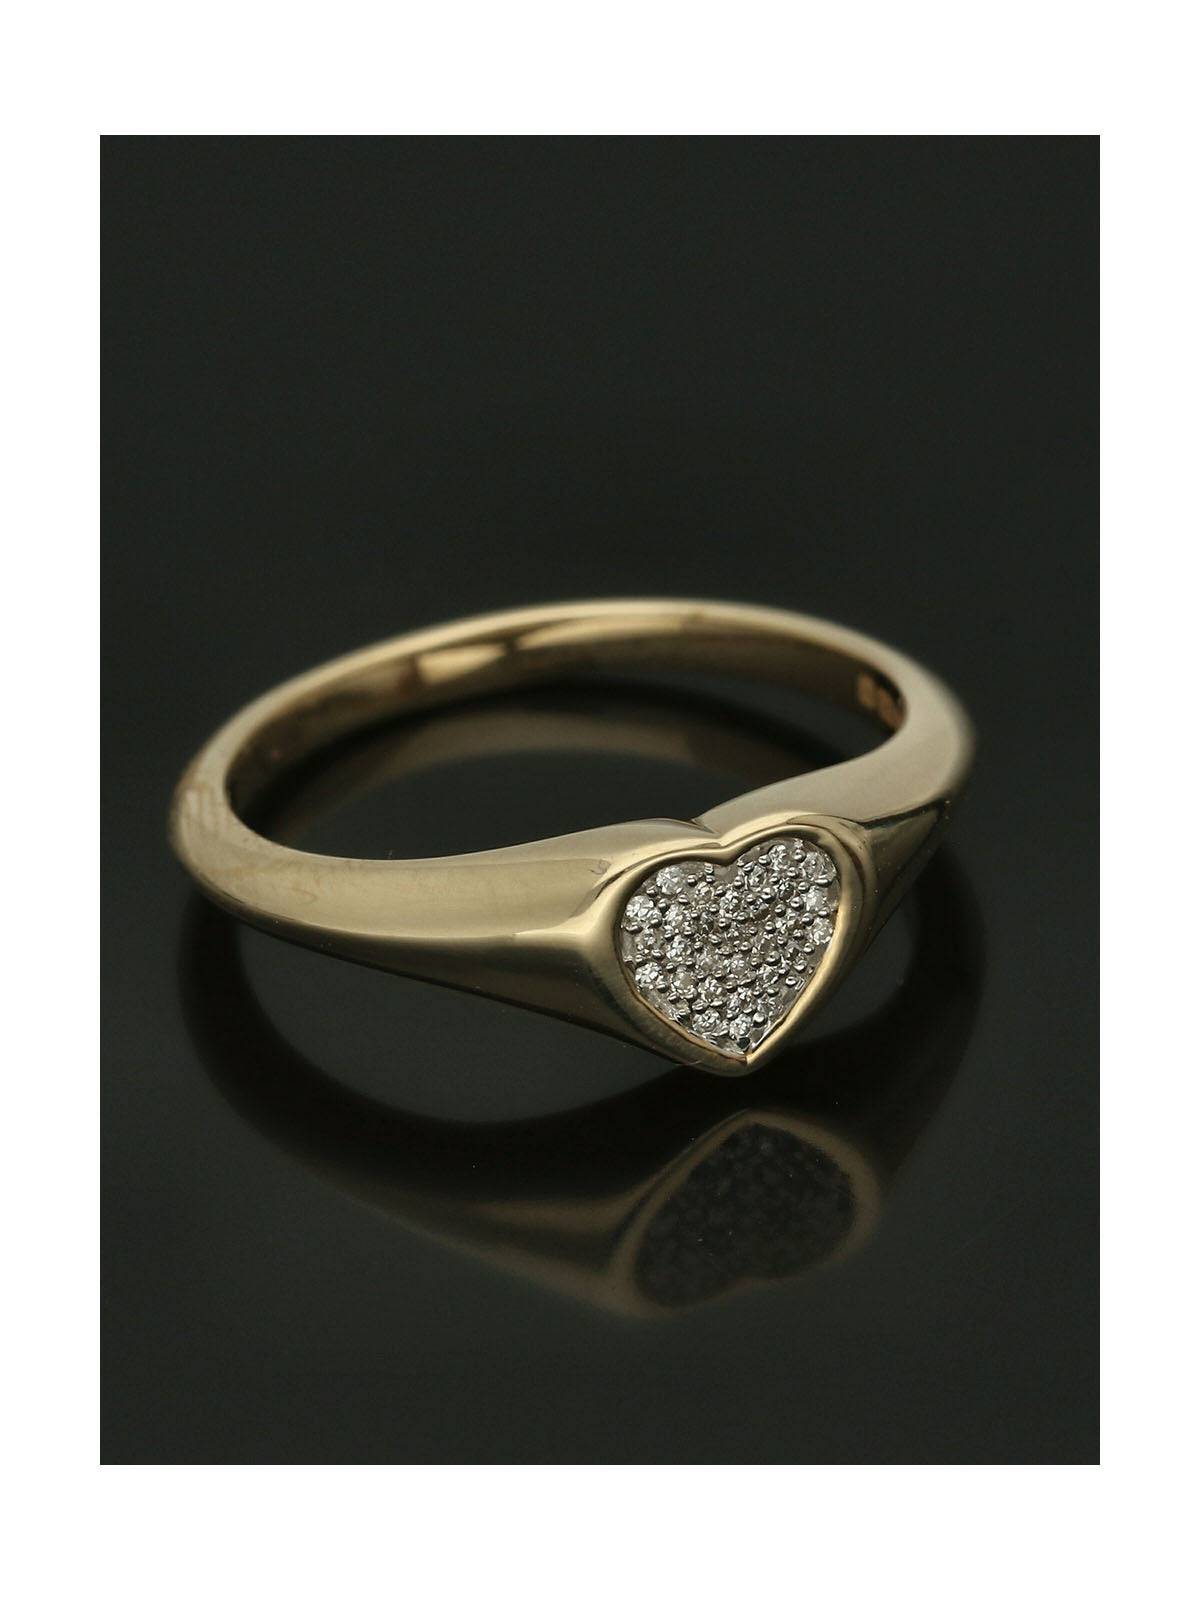 Diamond Pave Set 0.04ct Heart Signet Ring in 9ct Yellow Gold